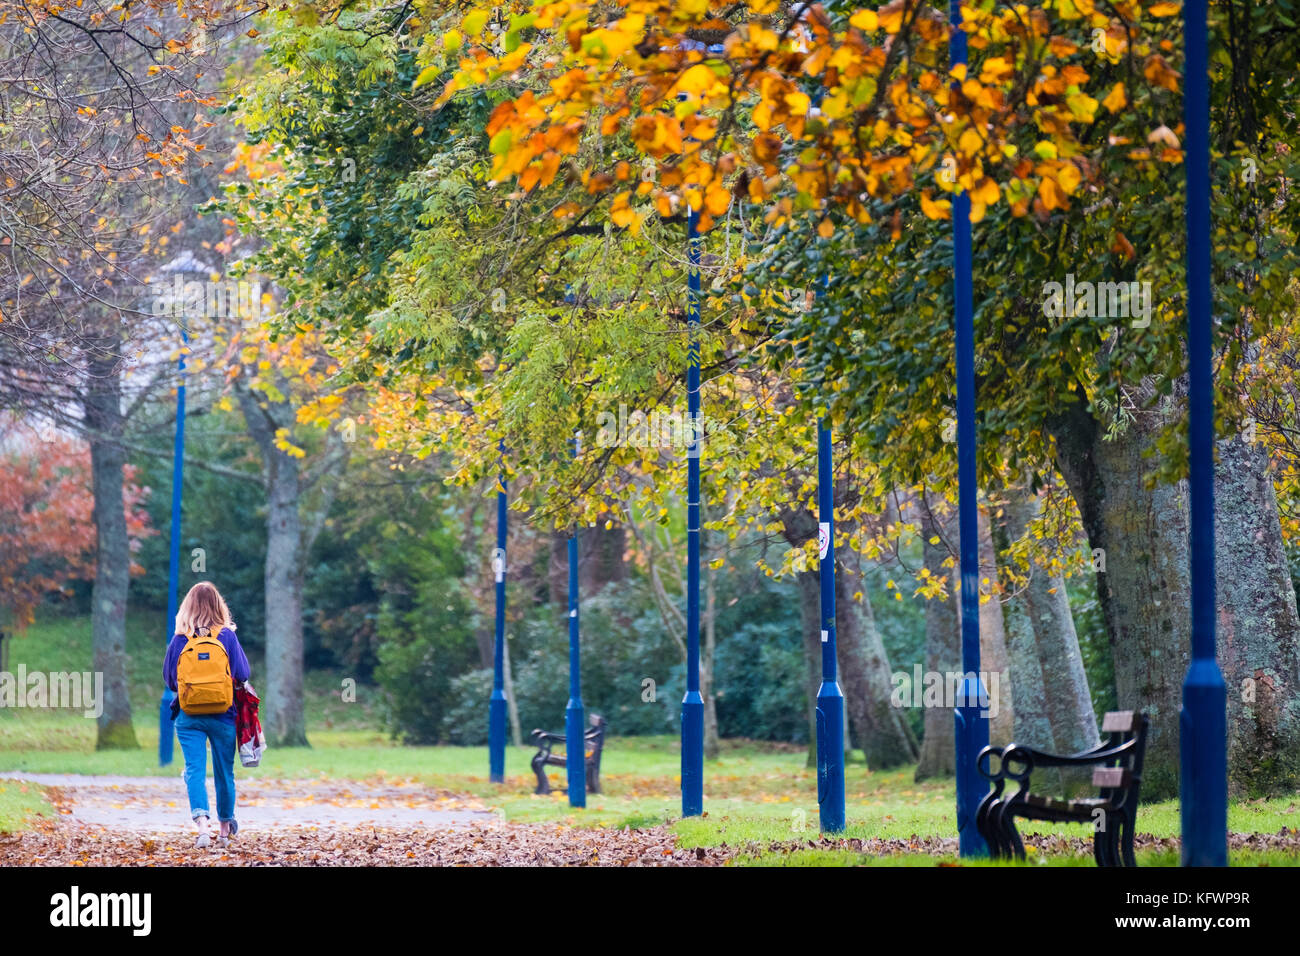 Aberystwyth Wales UK, Wednesday 1 November 2017 UK weather: A young woman walking along Plascrug Avenue in Aberystwyth on the first day of November, with all the deciduous trees shedding their leaves in a myriad of rich autumnal colours photo Credit: Keith Morris/Alamy Live News Stock Photo